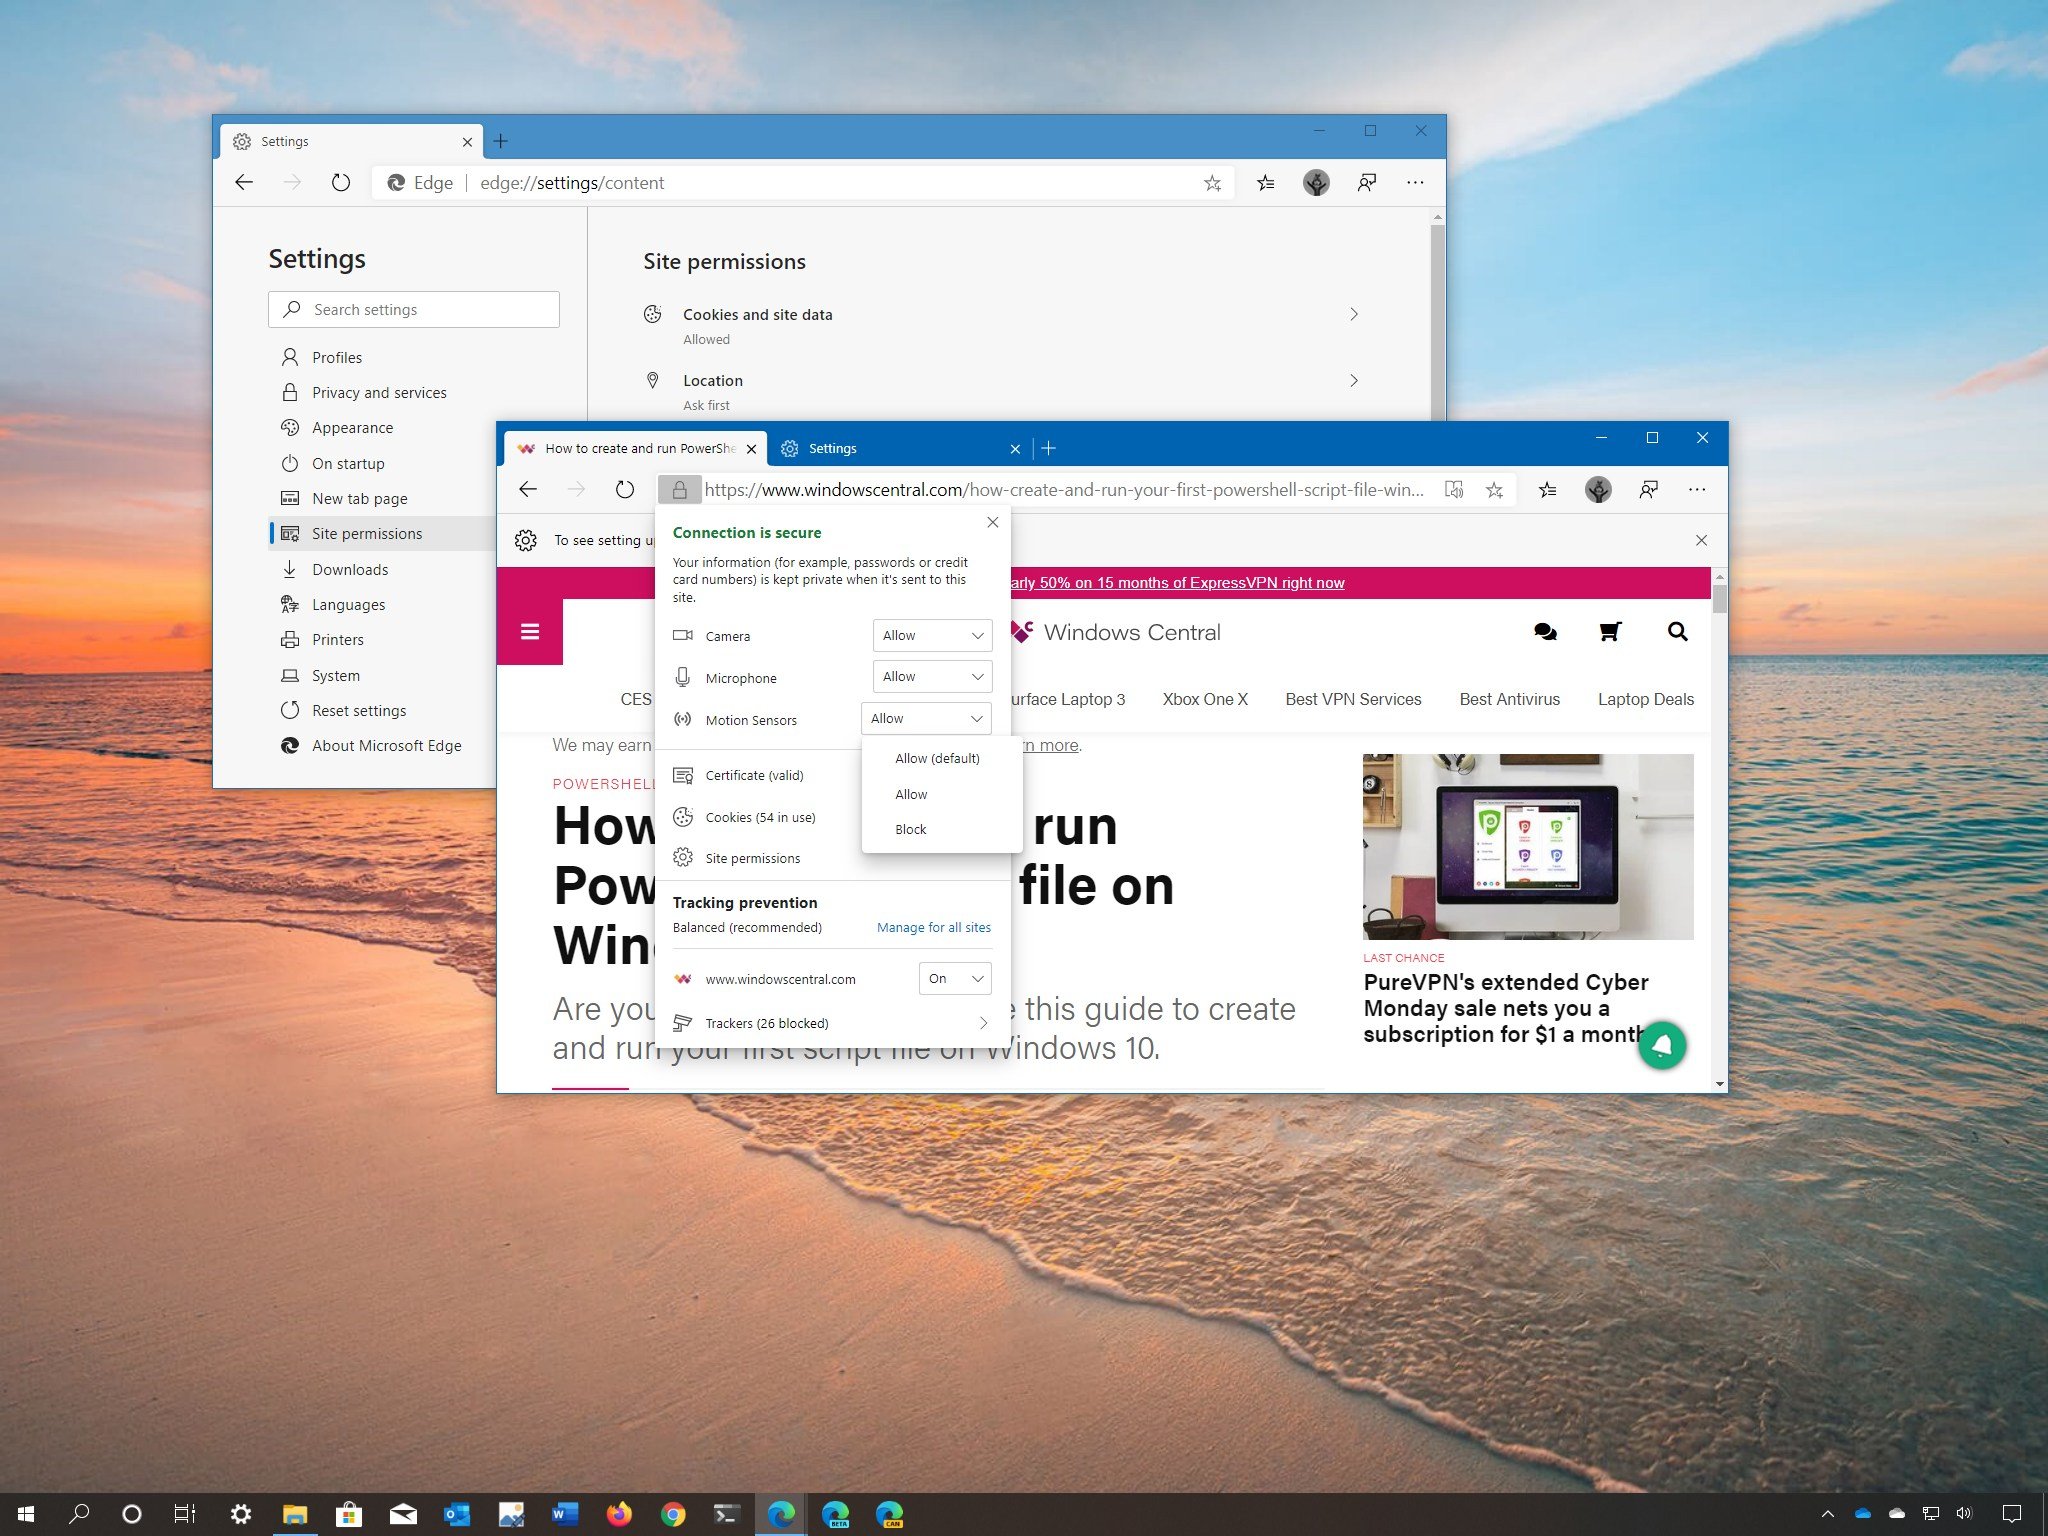 How to manage site permissions on the new Microsoft Edge